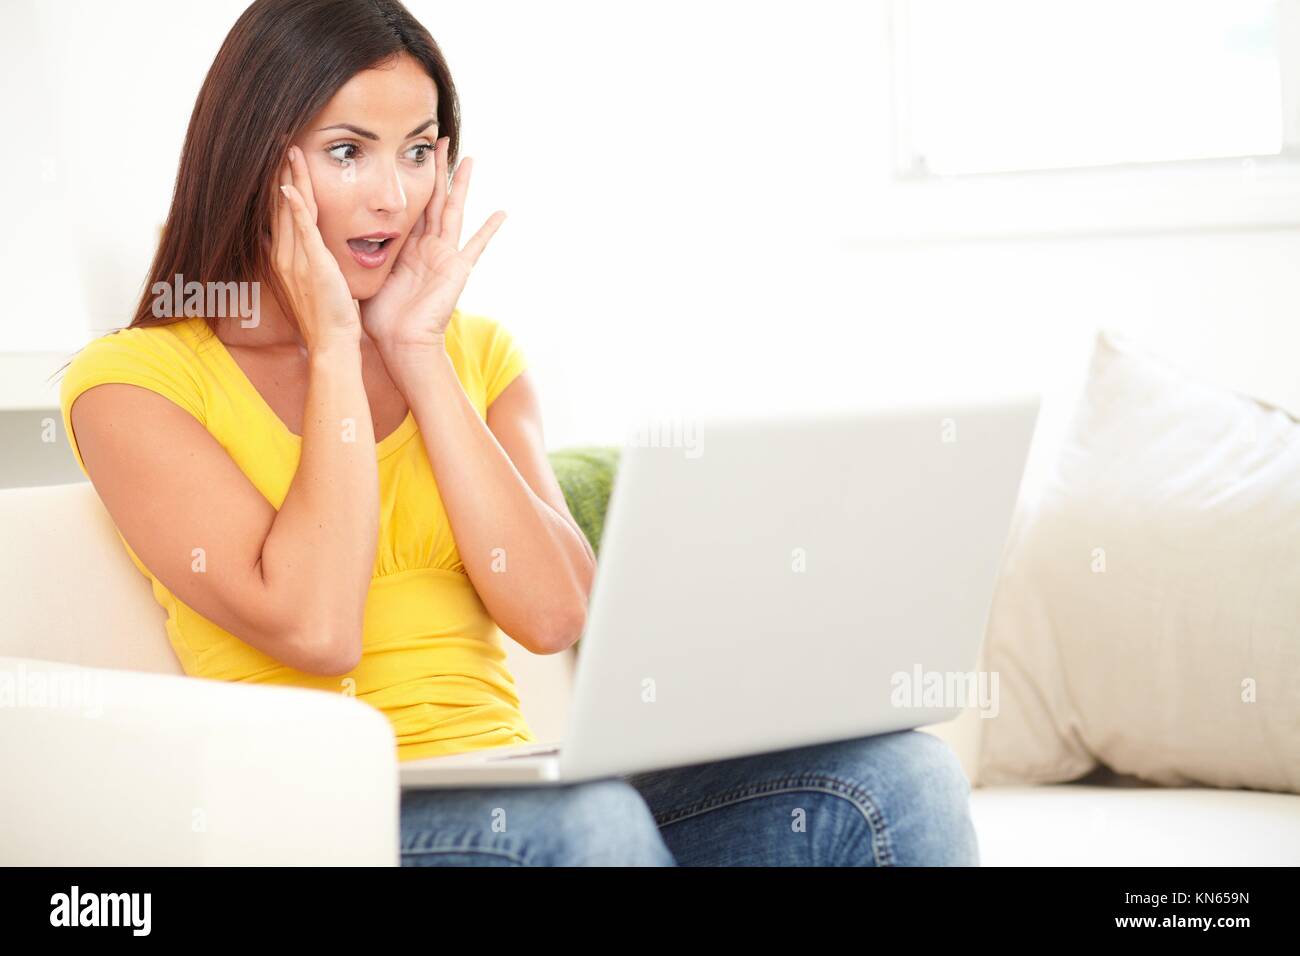 Young student with brown hair looking shocked while using a laptop indoors. Stock Photo